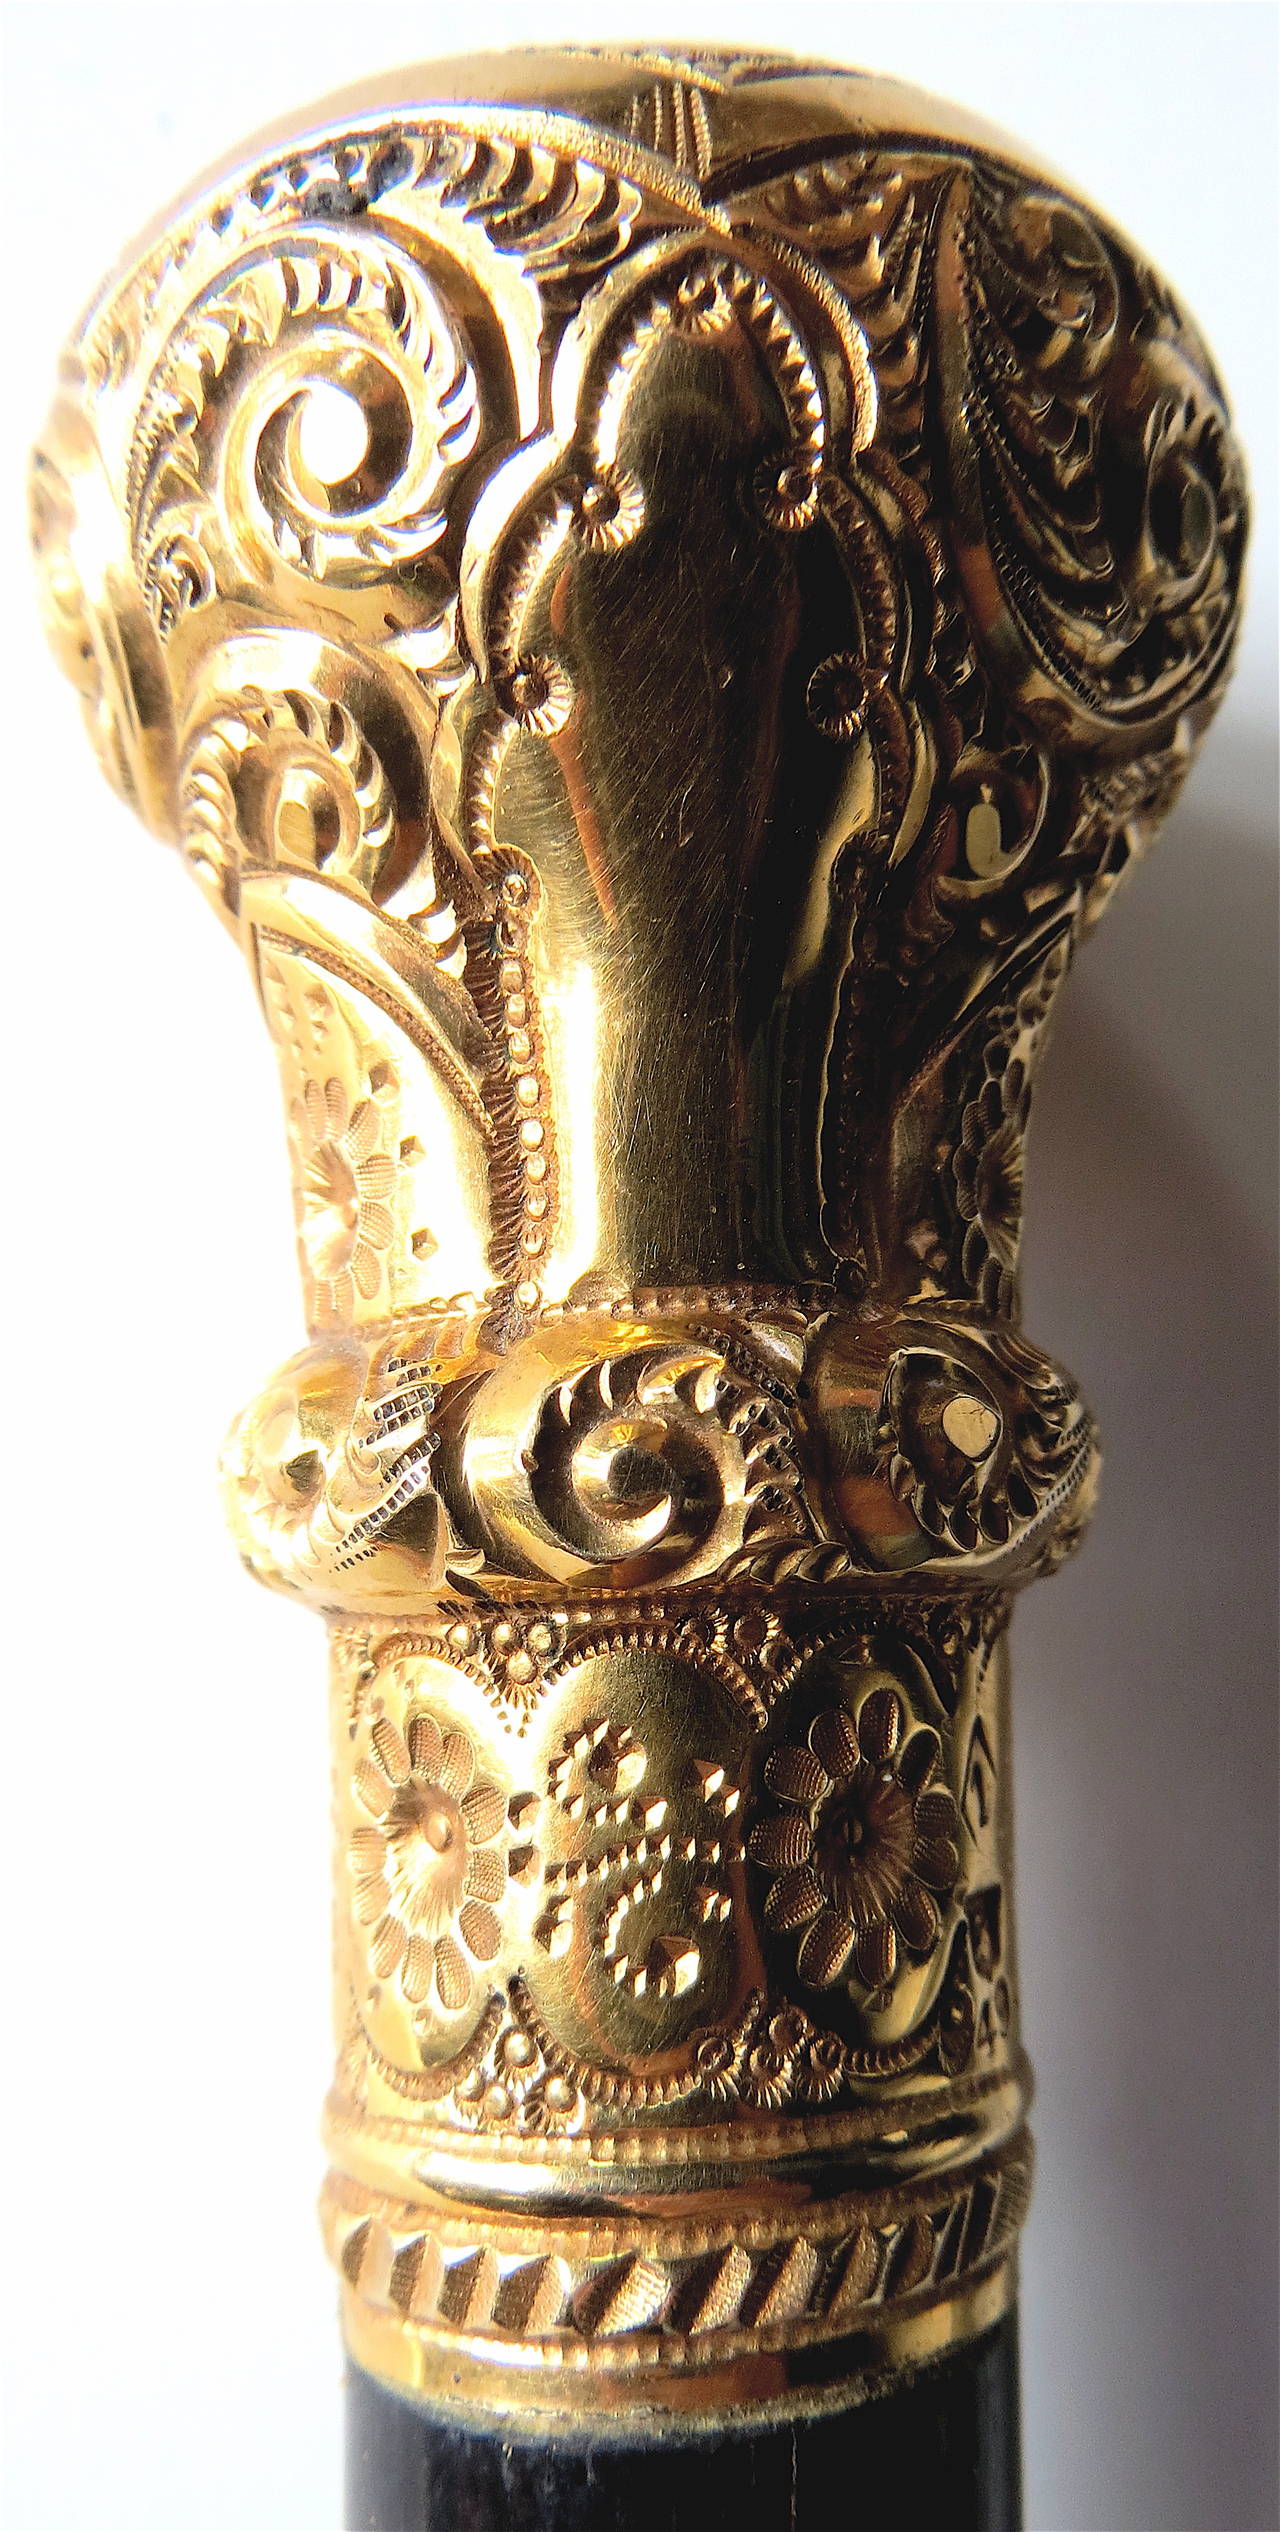 Commemorative cane was a gift celebrating one's 50th wedding anniversary, as evidenced by the inscription at the top (see image). The name of the recipient in script is difficult to decipher in its entirety. 
